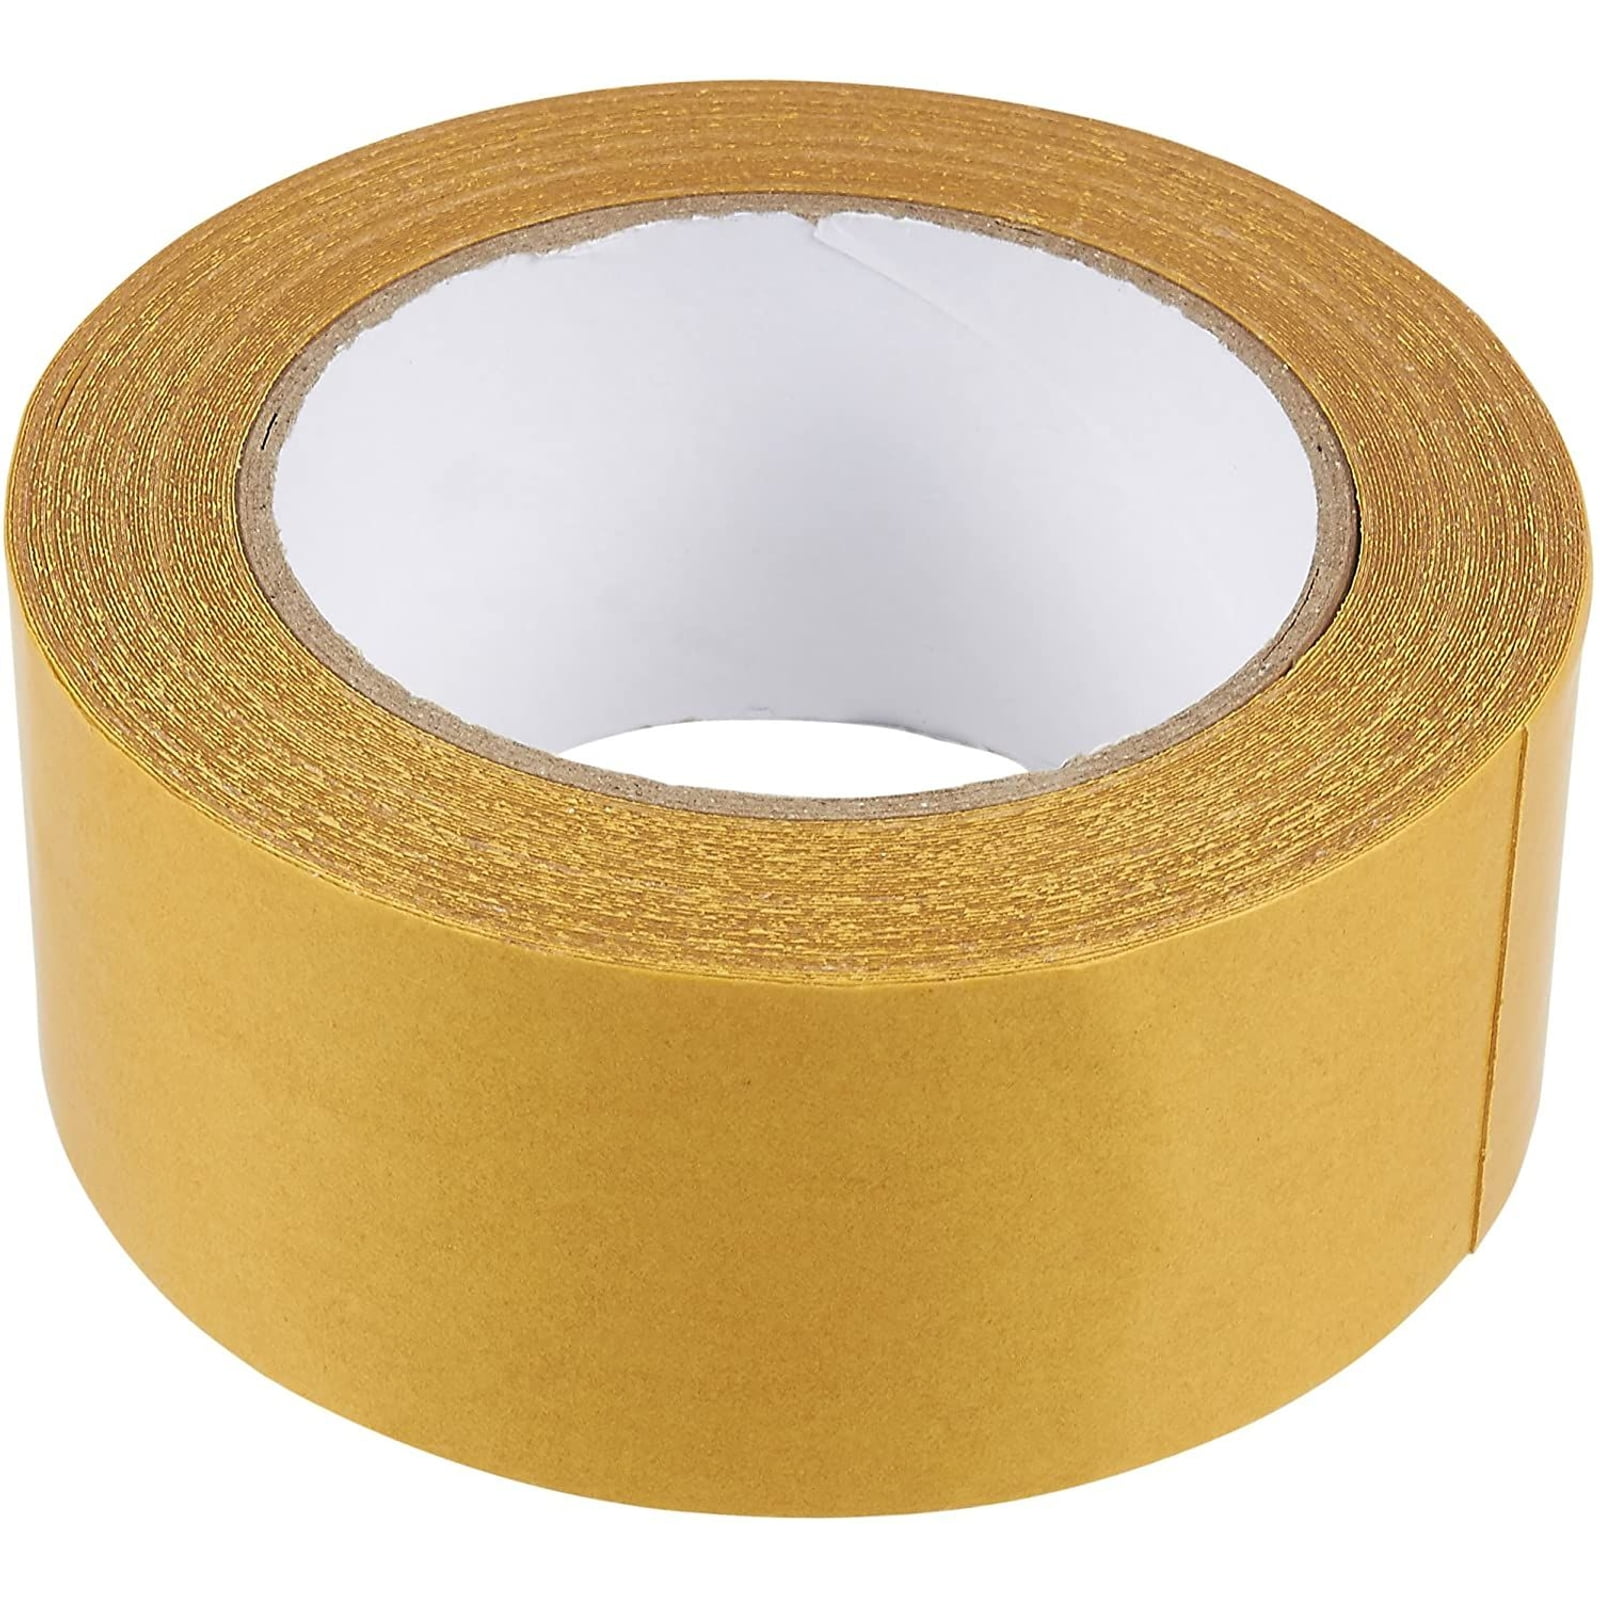 5M Double Sided Carpet Tape Heavy Duty for Area Rugs,Tile Hardwood  Floors,Over Carpet,Rug Tape High Adhesive and Removable - AliExpress